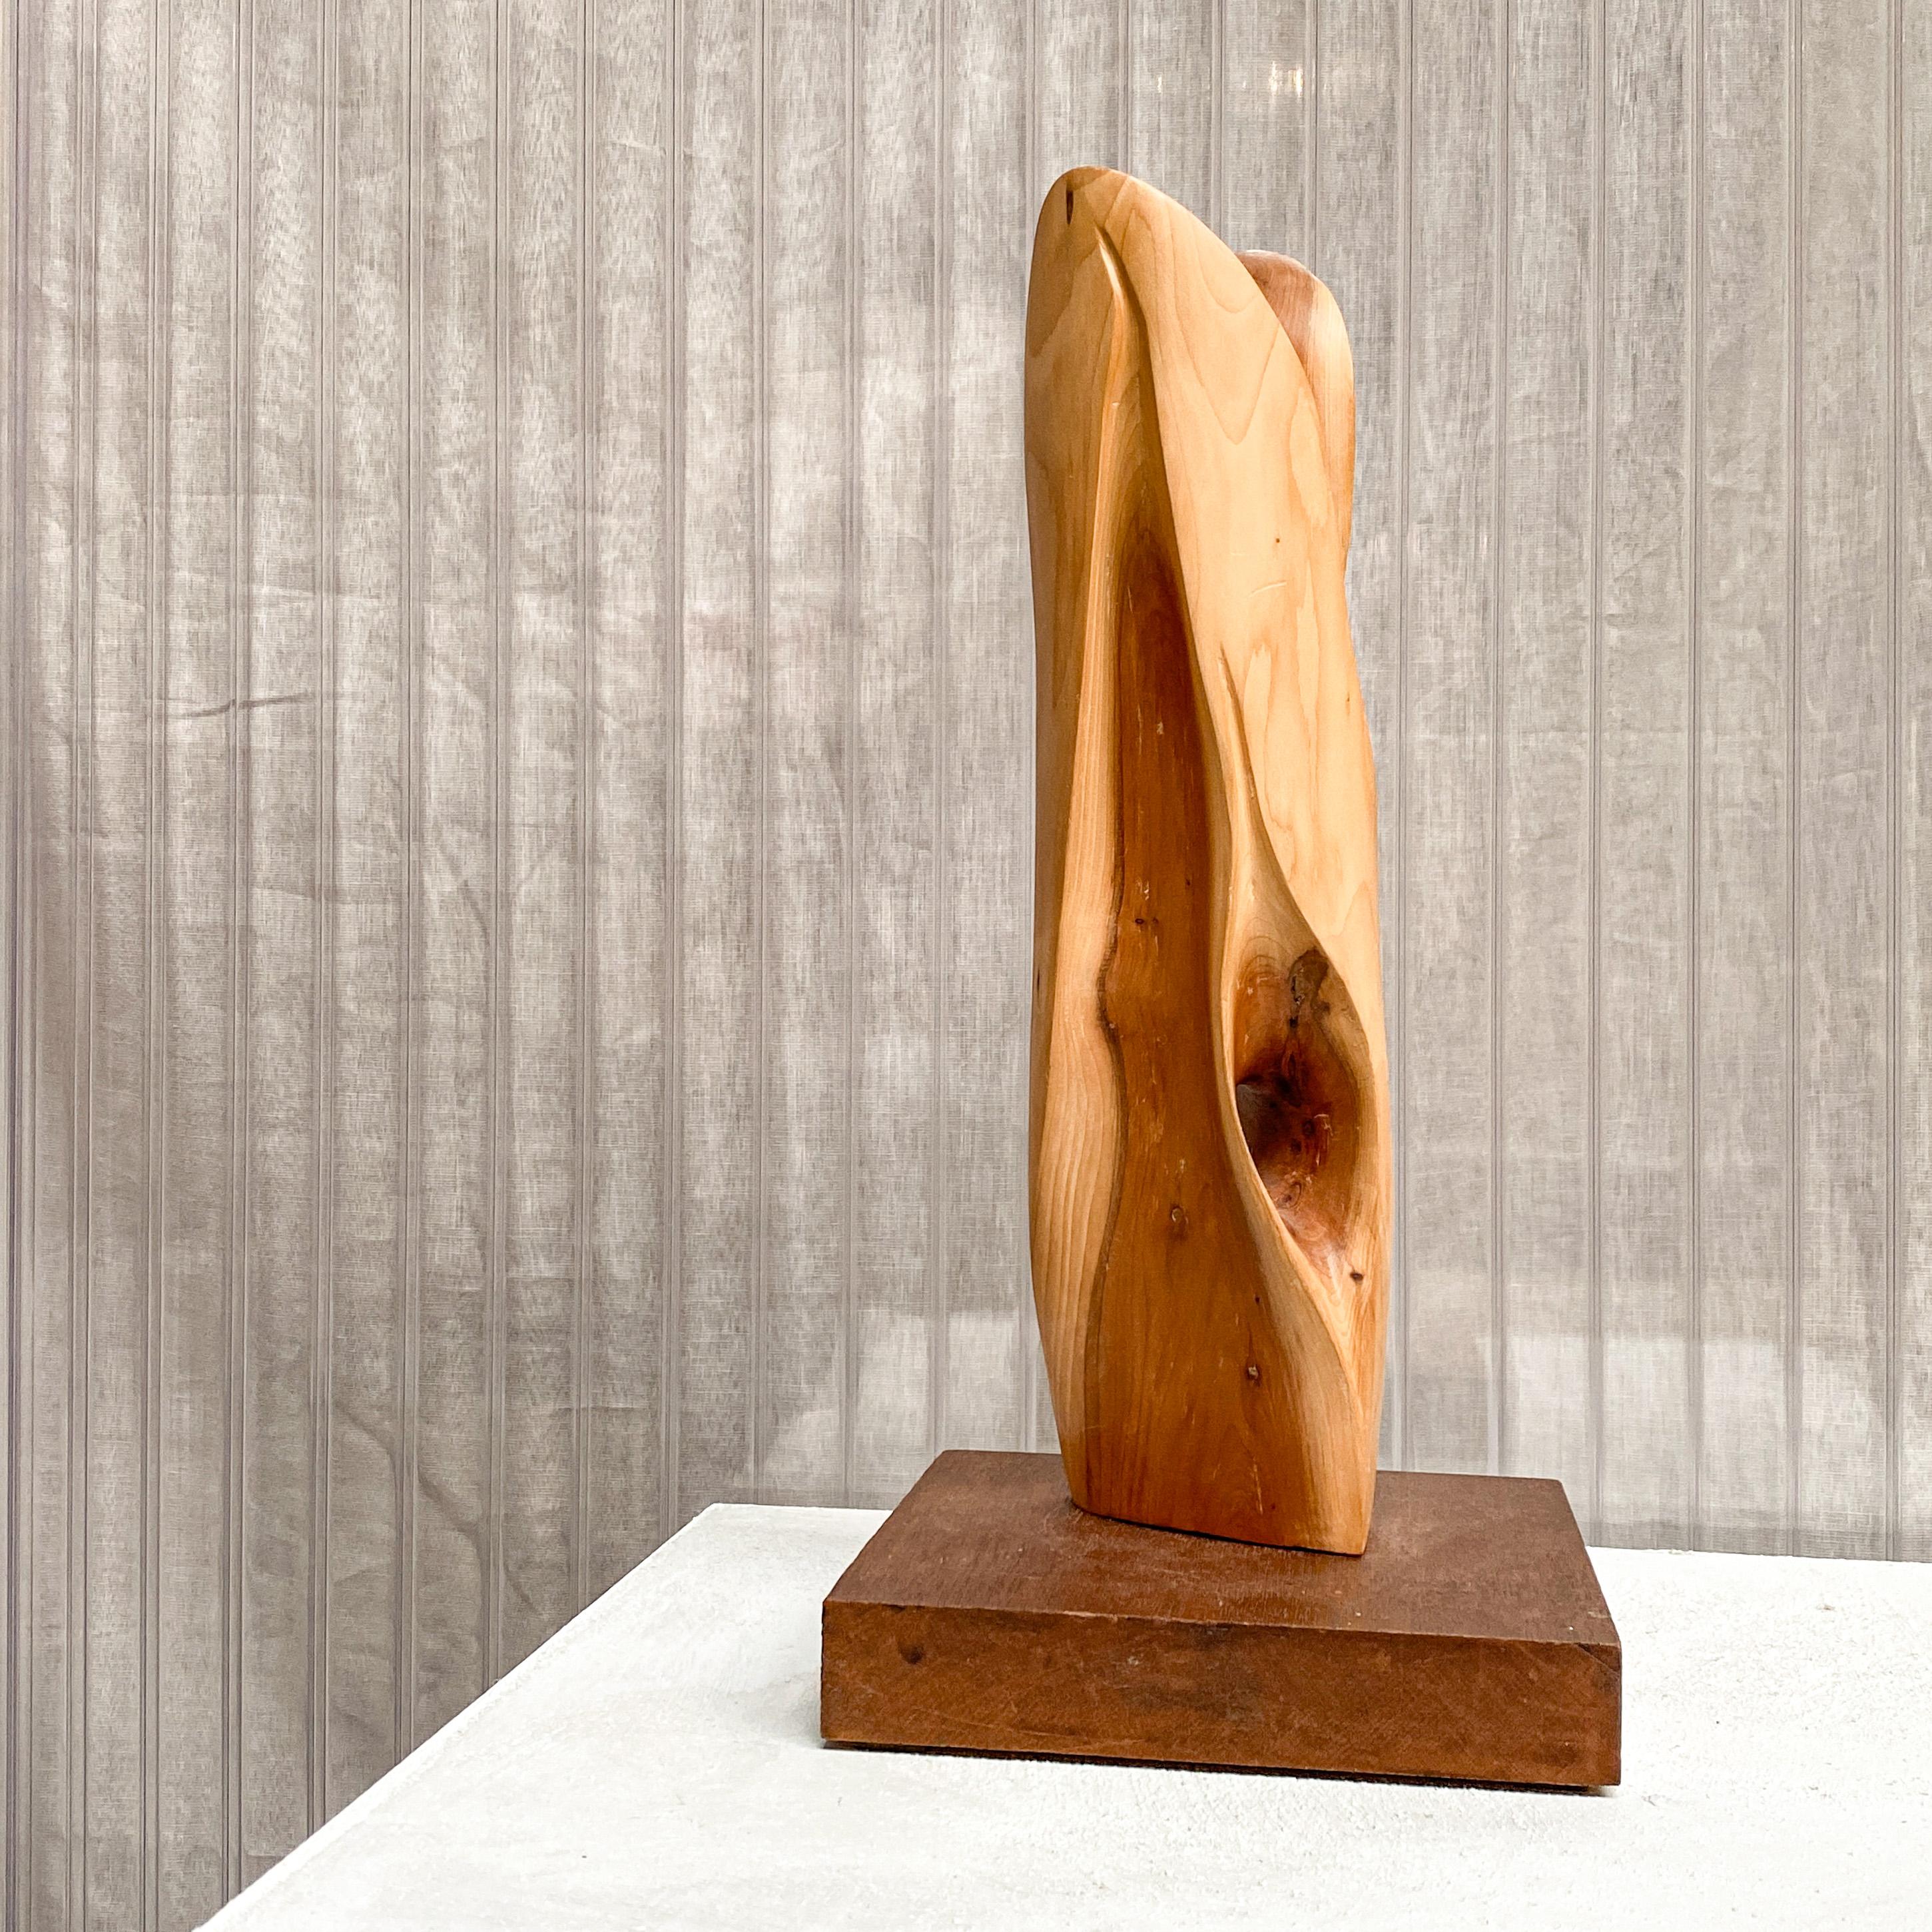 An amorphous and abstract piece by an unknown Artist. A hand-carved totem-like form made of natural wood form with a sculptural shape, typical of the 1960s/1970s. The wood with natural cracks and fissures.

The shape is mounted on a wooden base,